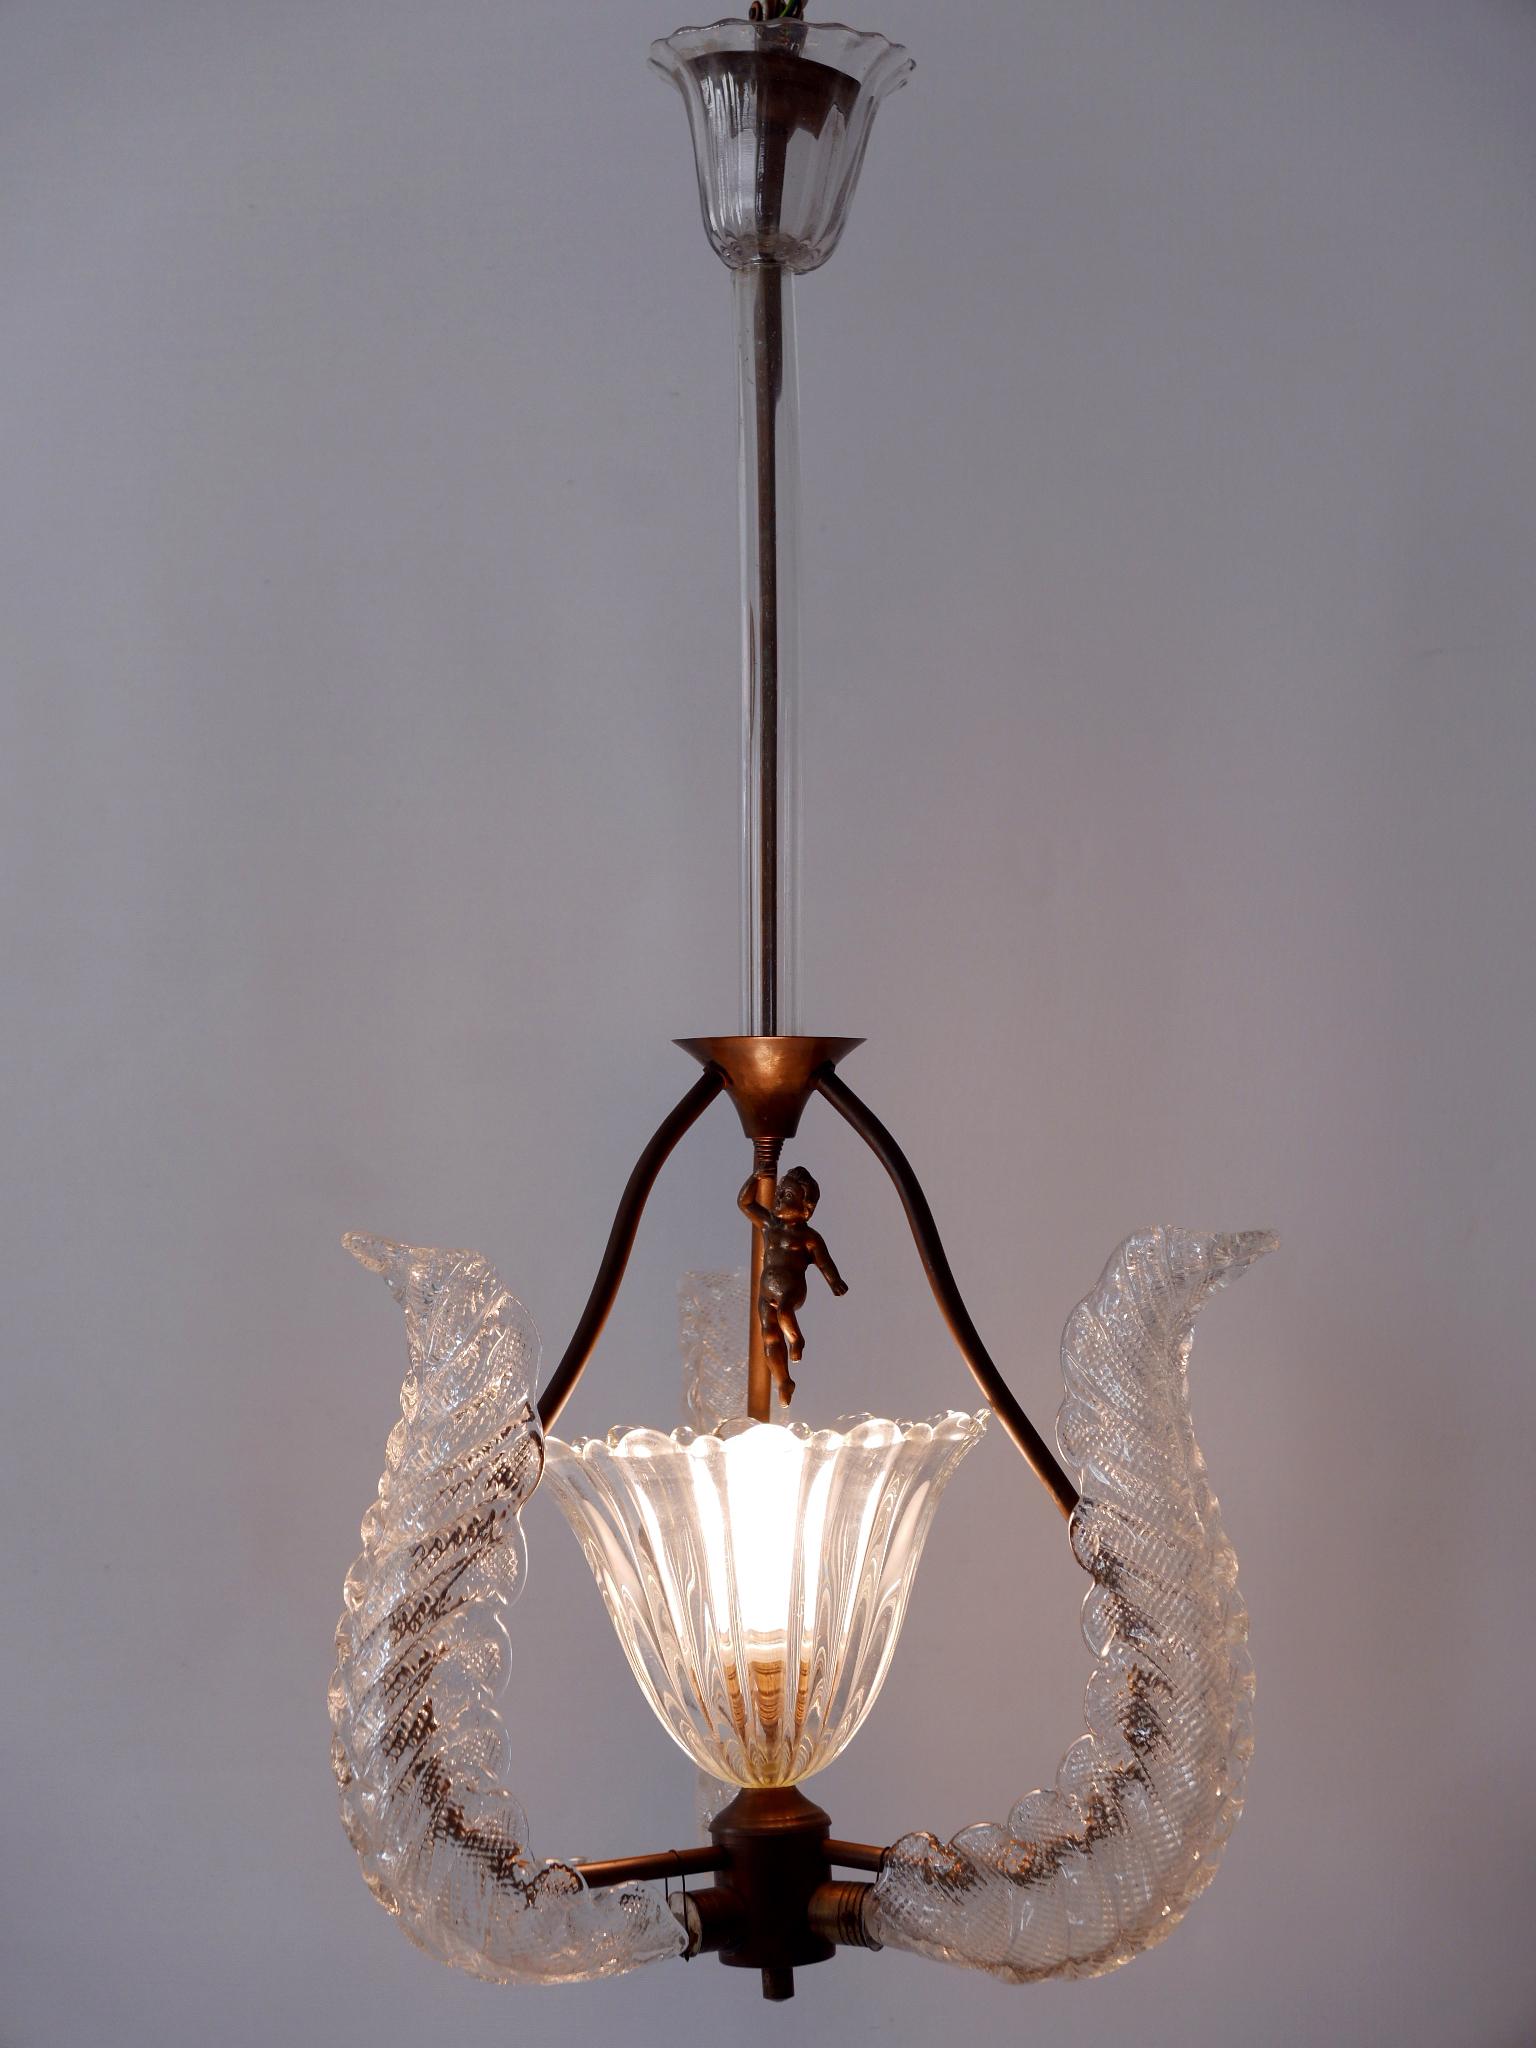 Gorgeous, highly decorative Mid-Century Modern 'Putti' pendant lamp or chandelier. Designed & manufactured by Barovier & Toso, Italy, 1950s.

Executed in Murano Glass and brass, the pendant lamp/chandelier needs 1 x E27 / E26 Edison screw fit bulb.